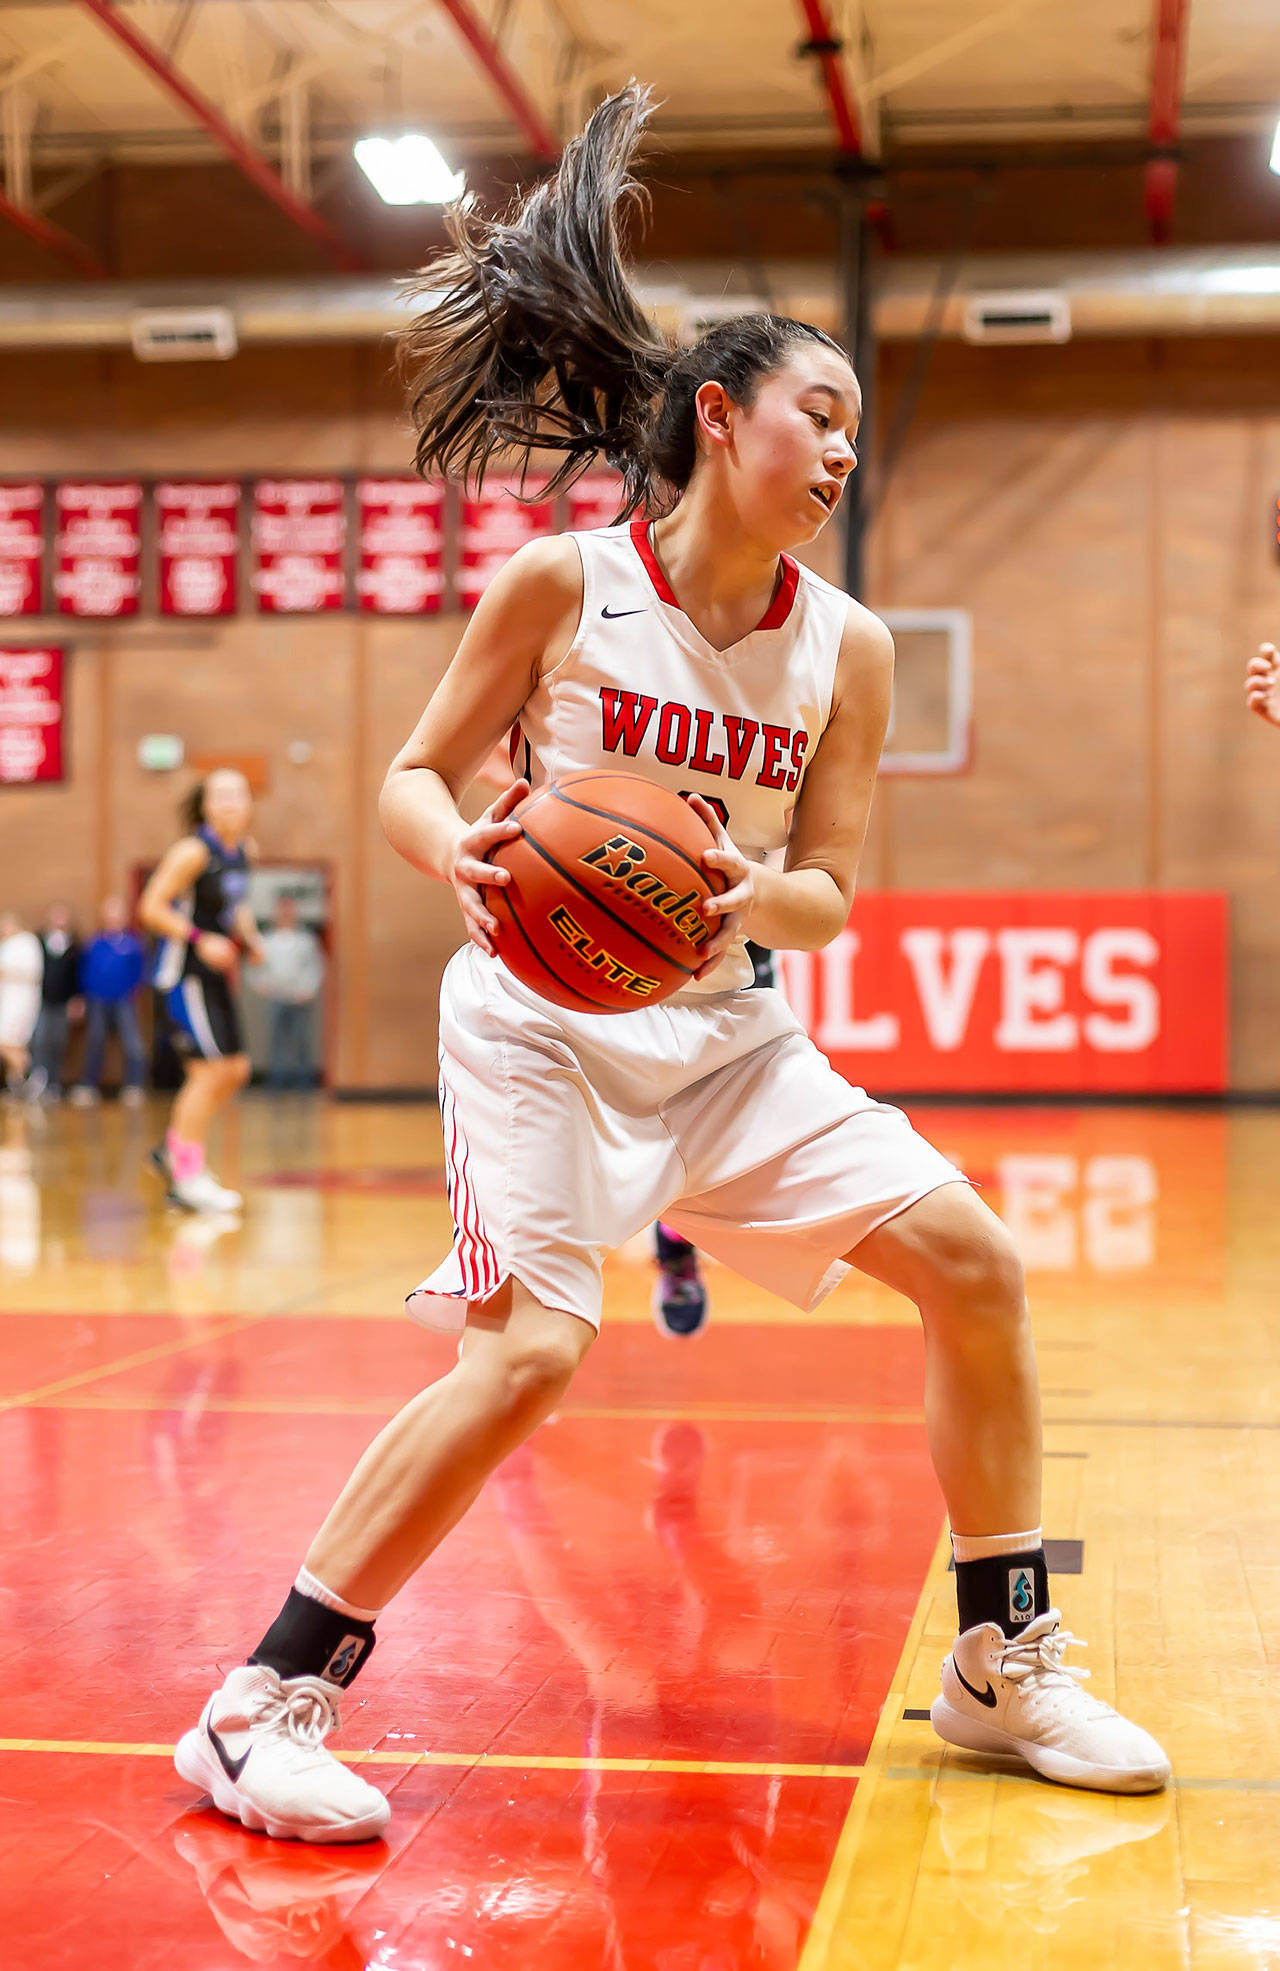 After grabbing a rebound, Scout Smith gets ready to head up court against South Whidbey.(Photo by John Fisken)